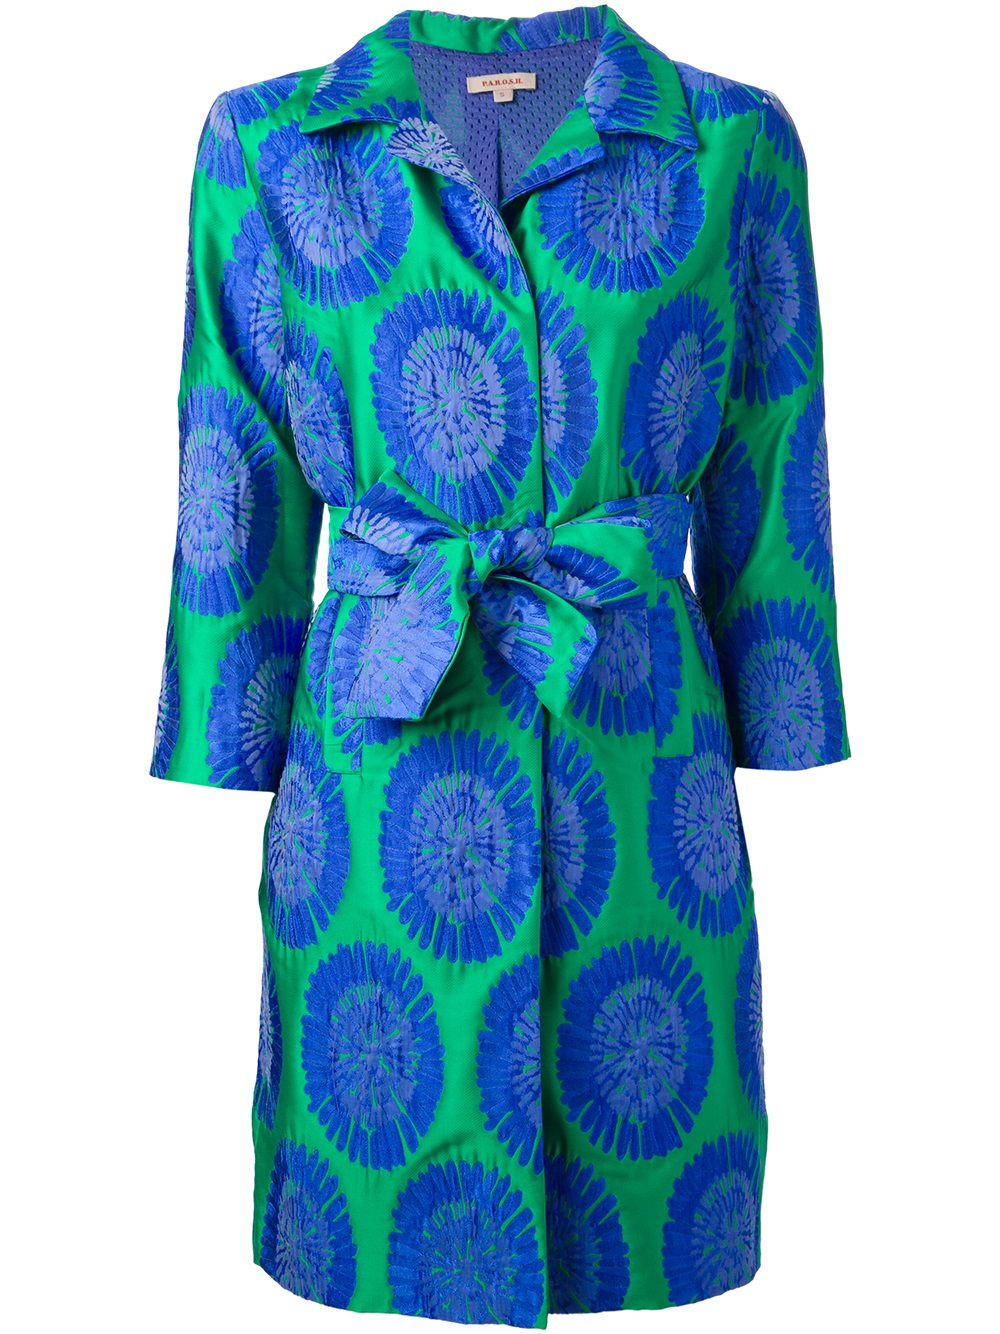 P.A.R.O.S.H. Gerard Floral Trench Coat in Green - Lyst